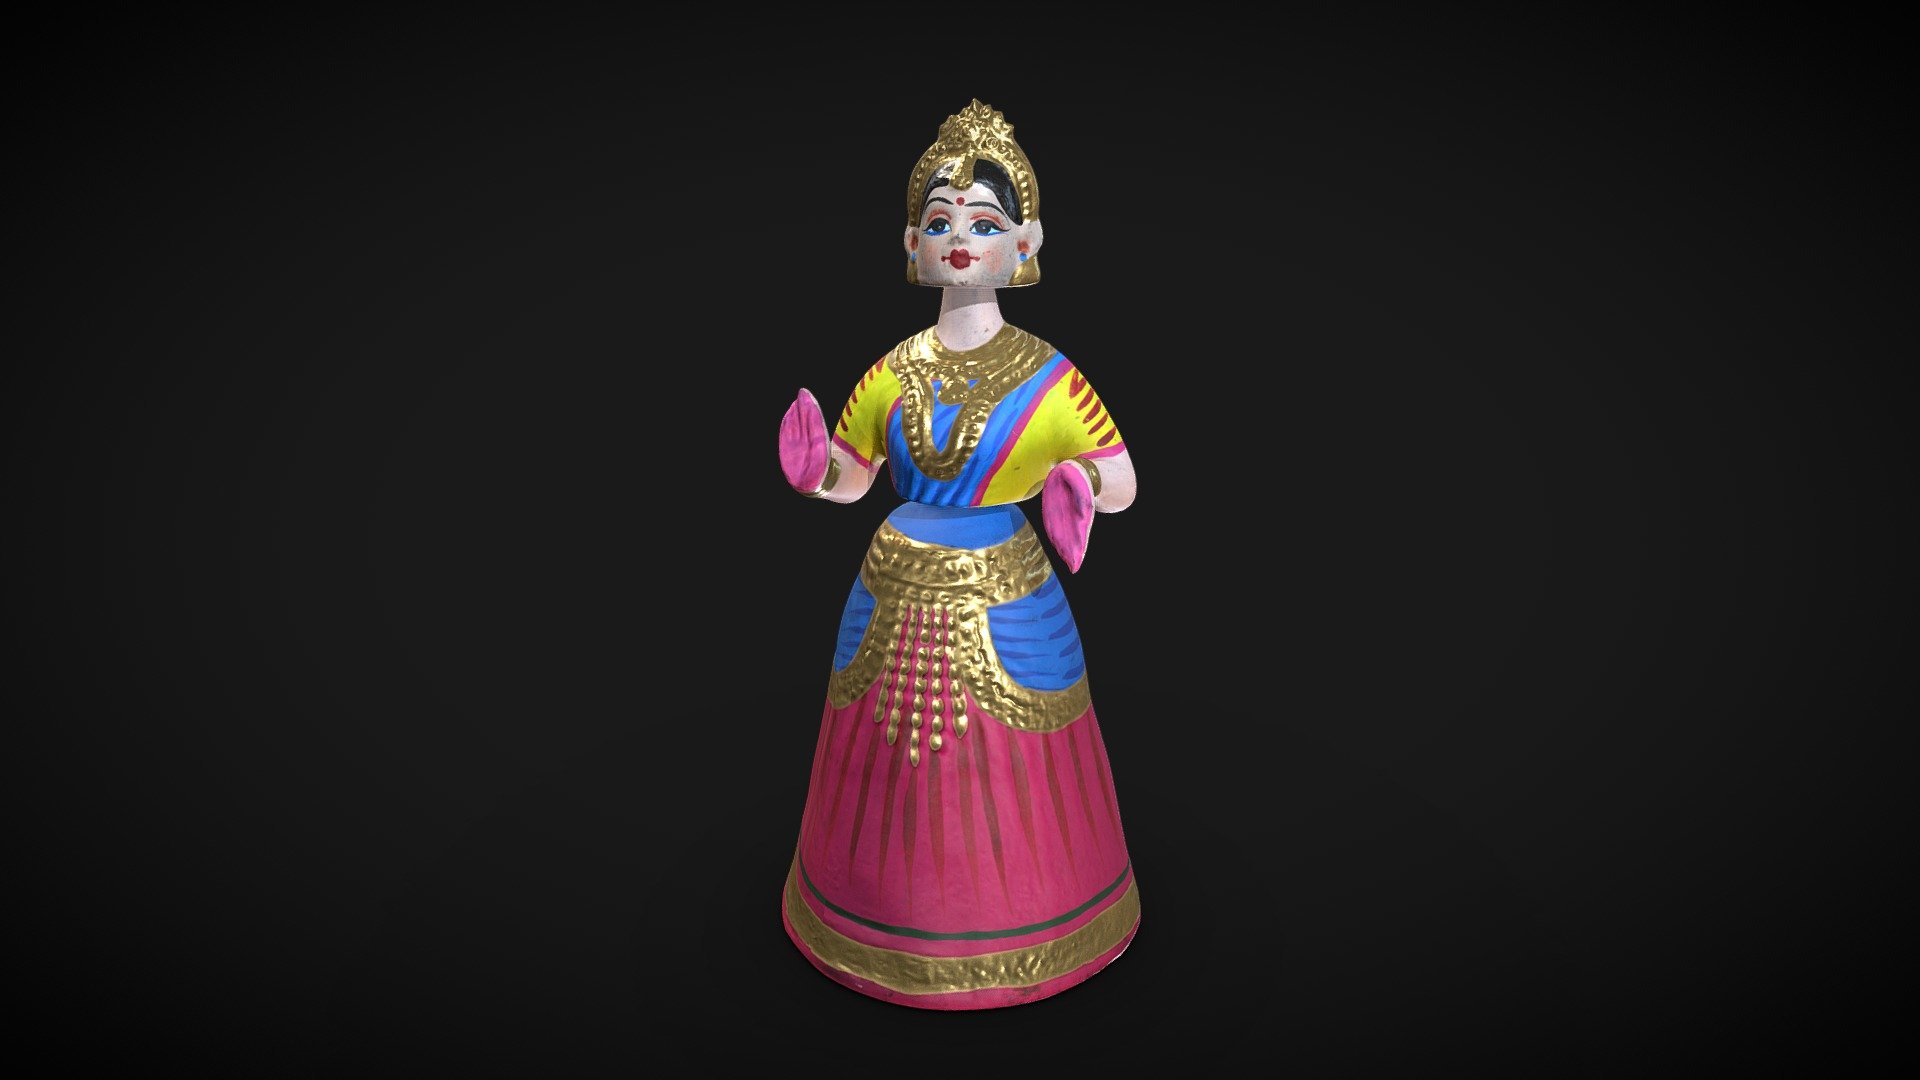 A 3dscan model of indian handcrafted doll
photogrammetry done in agisoft metashape - Indian handcrafted clay doll - 3D model by Streak17(ashish sharma) (@Streak17) 3d model